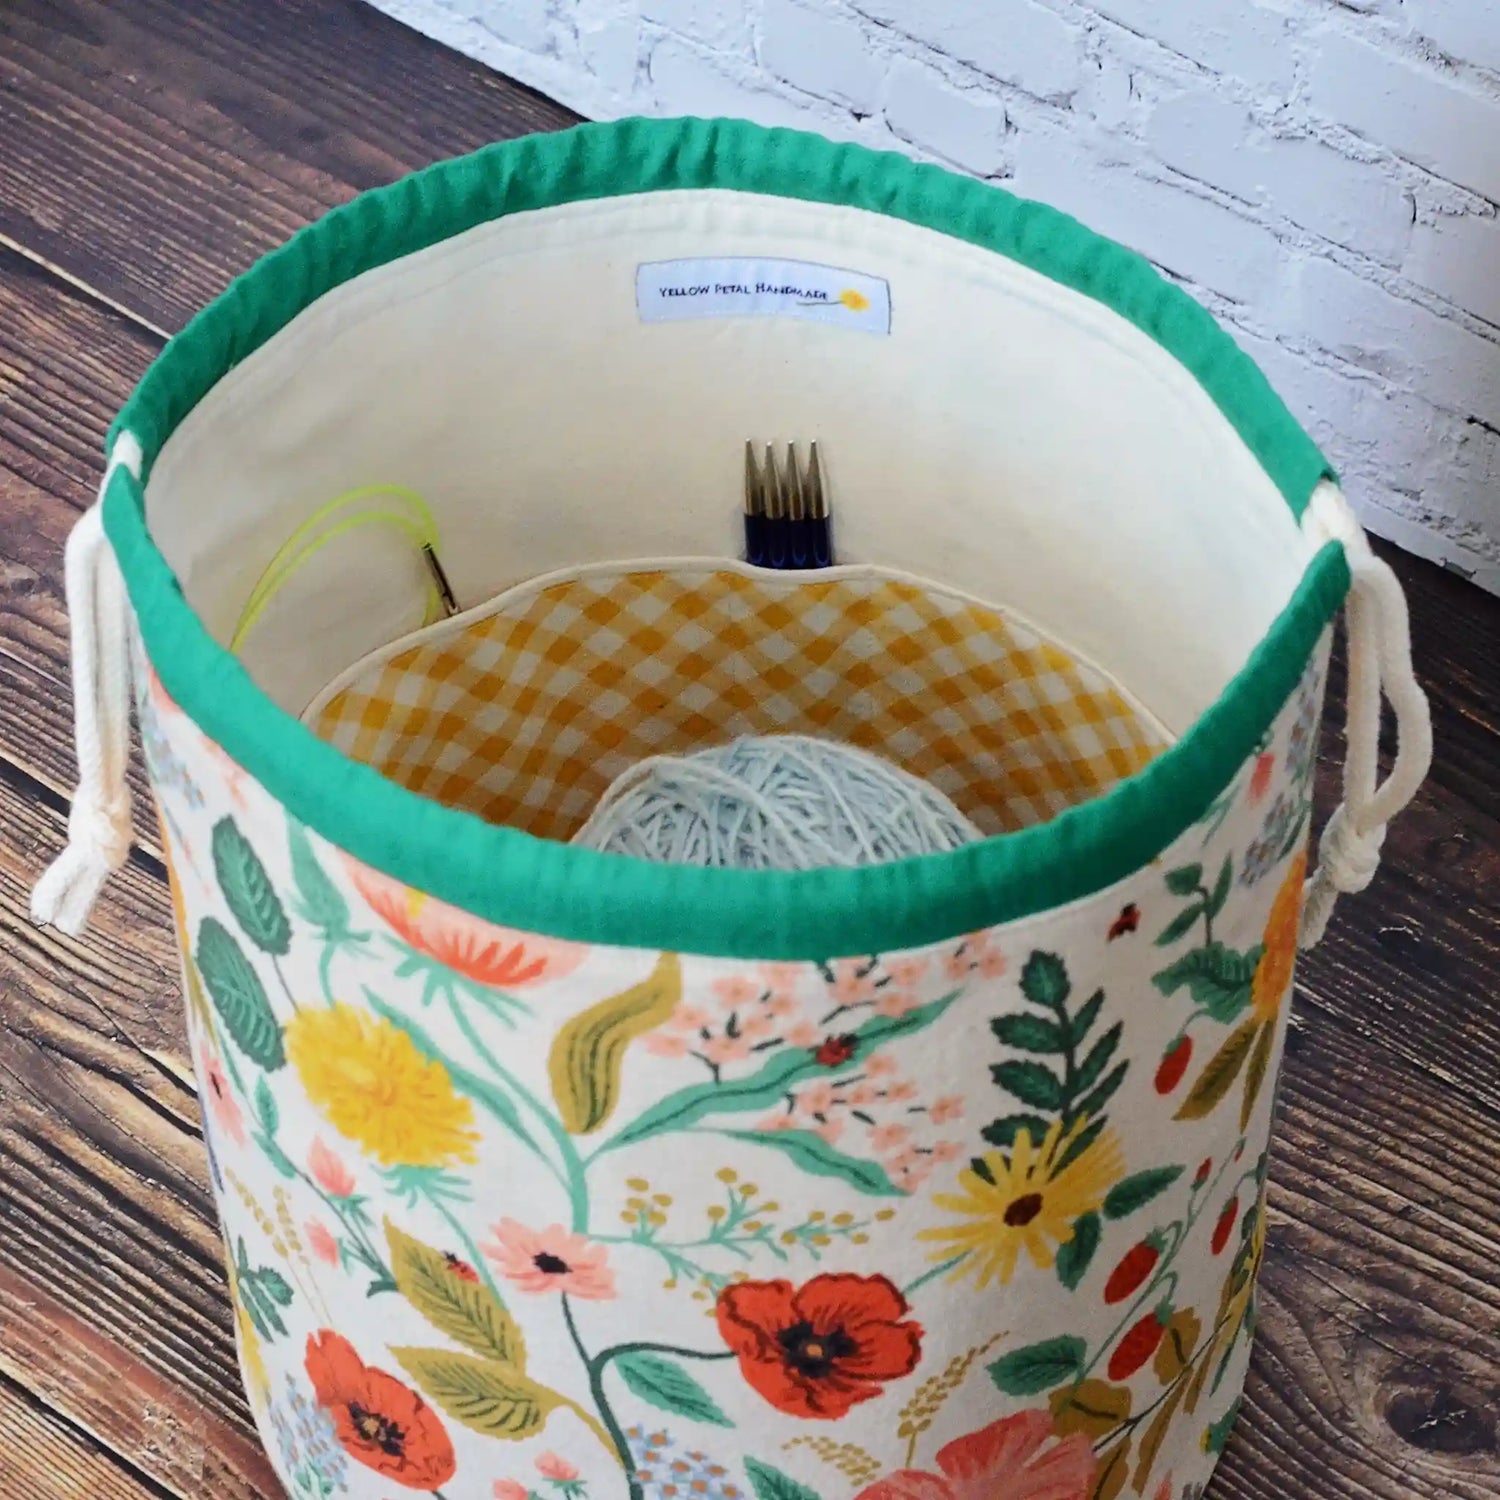 Pretty unbleached floral canvas bucket bag for knitting or crochet.  Made in Nova Scotia by Yellow Petal Handmade.